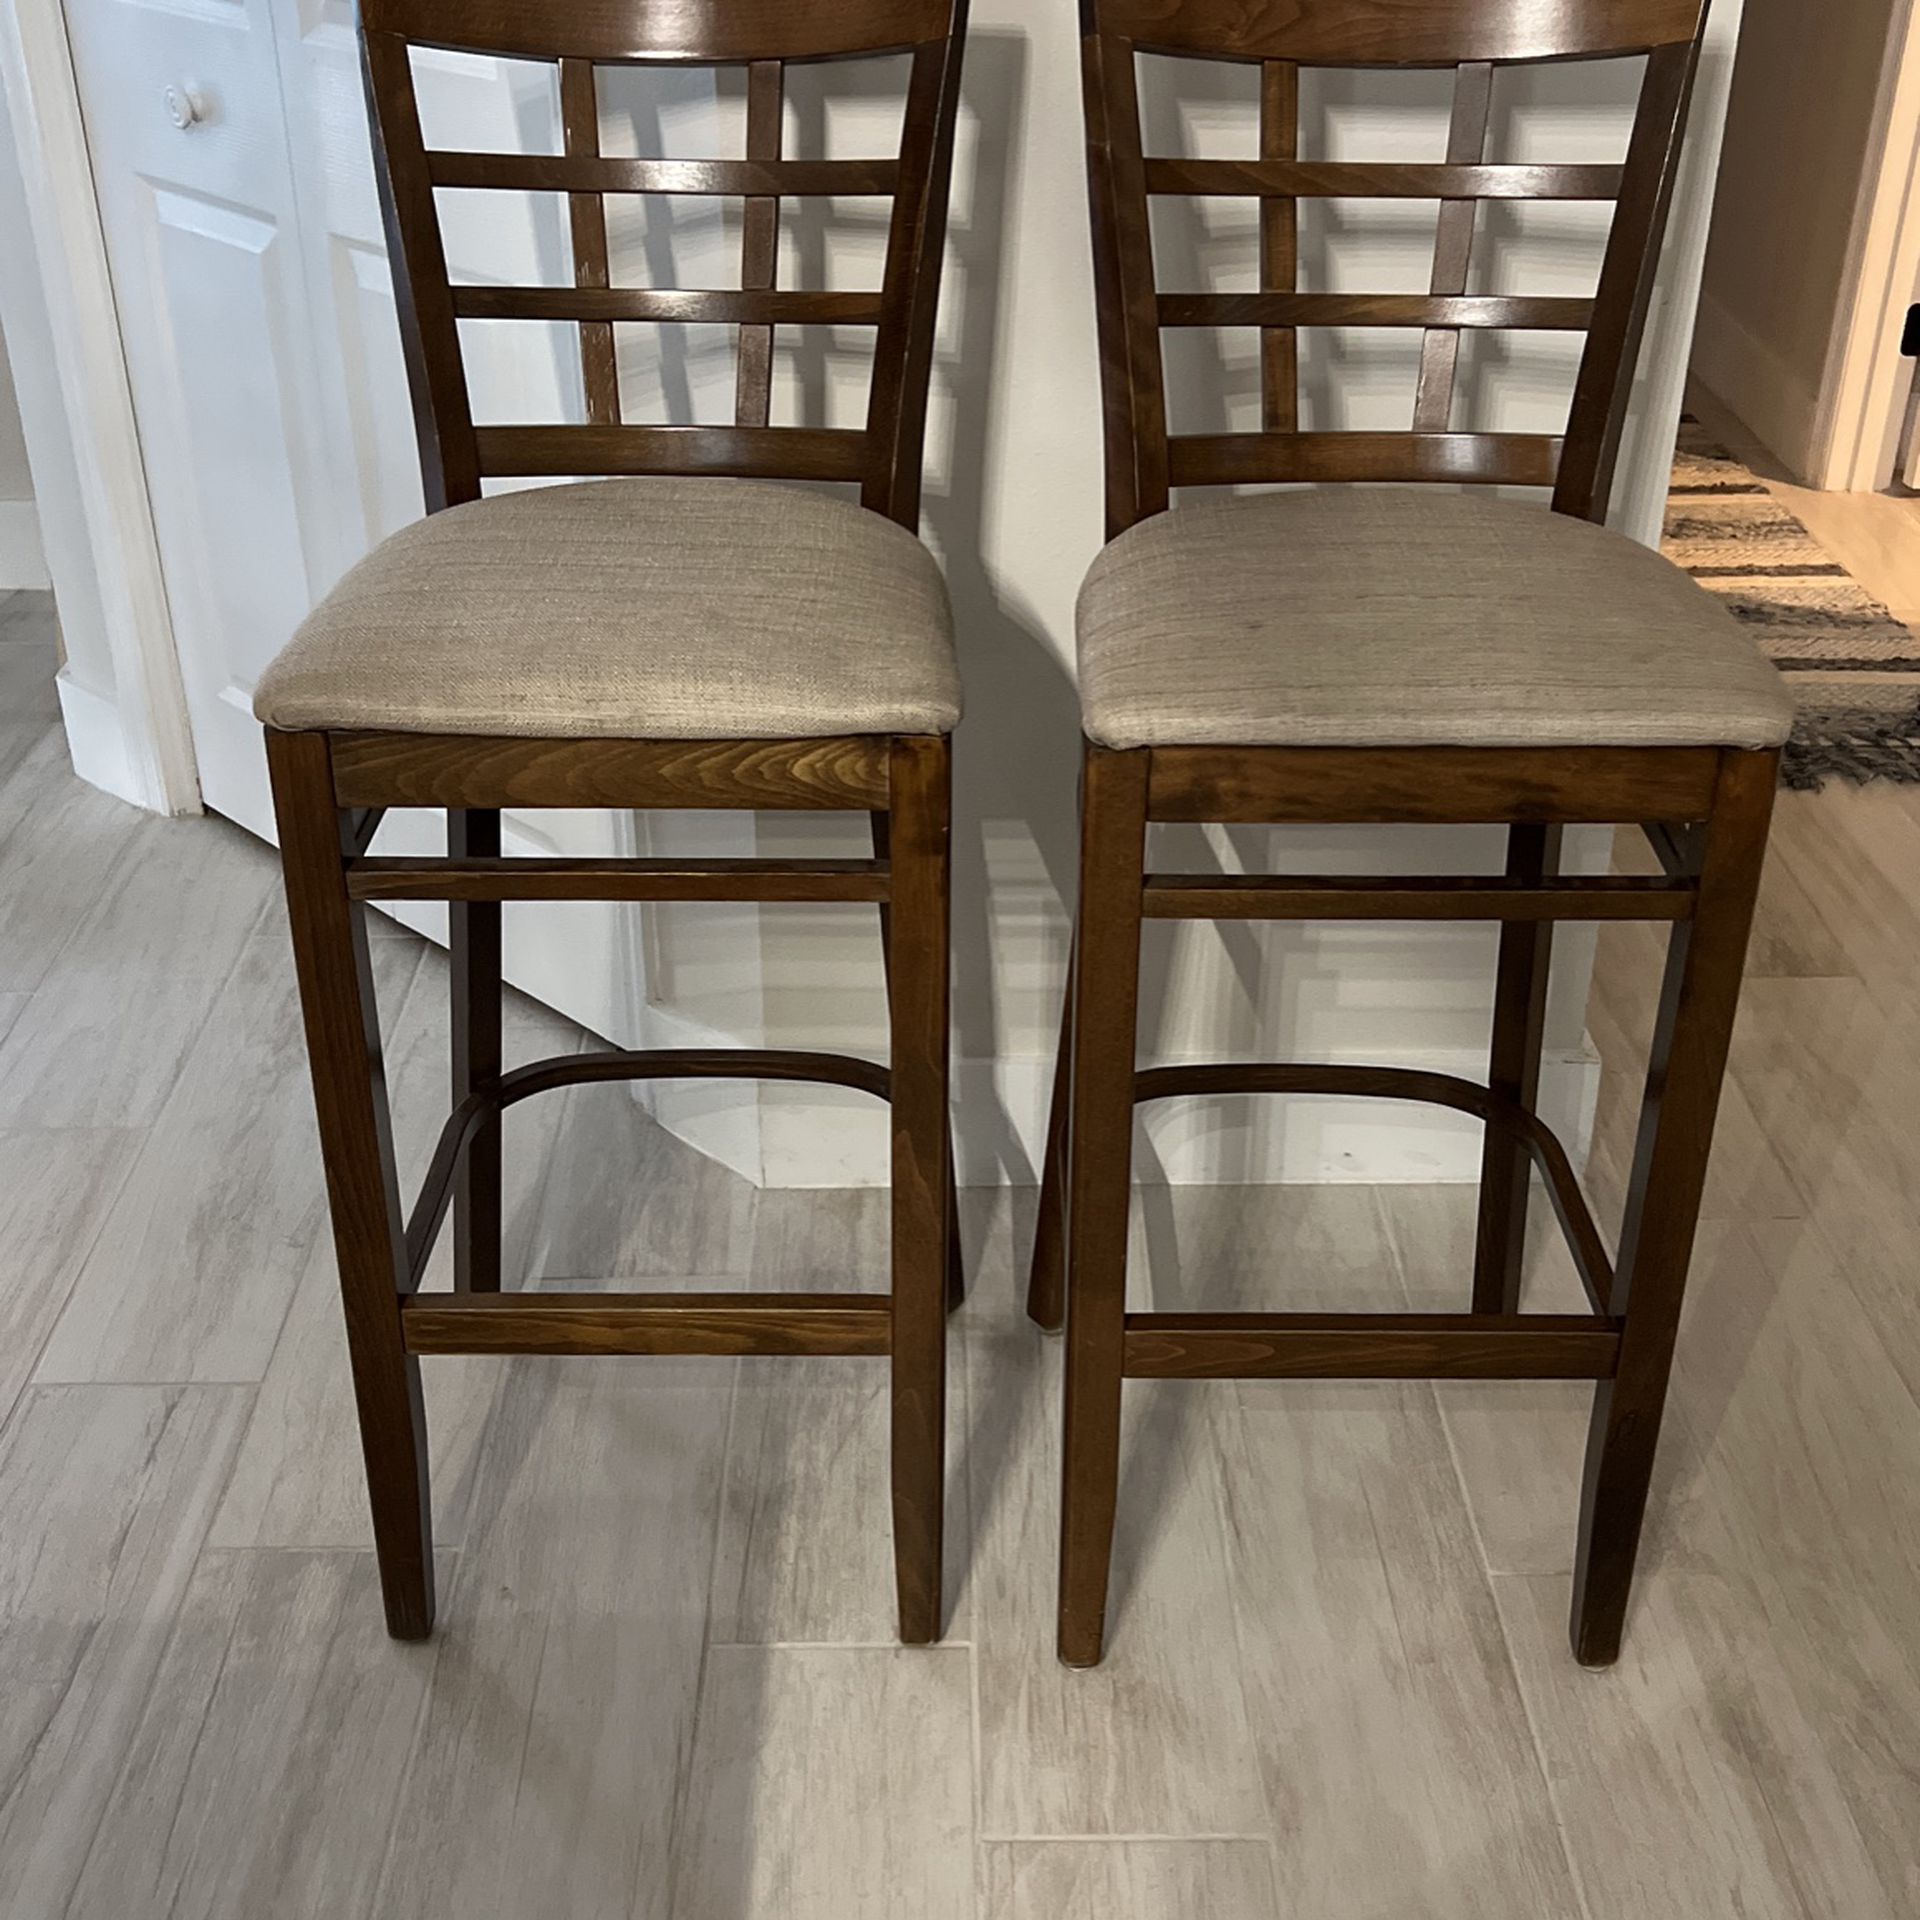 Two Wooden Bar Top  Stools 